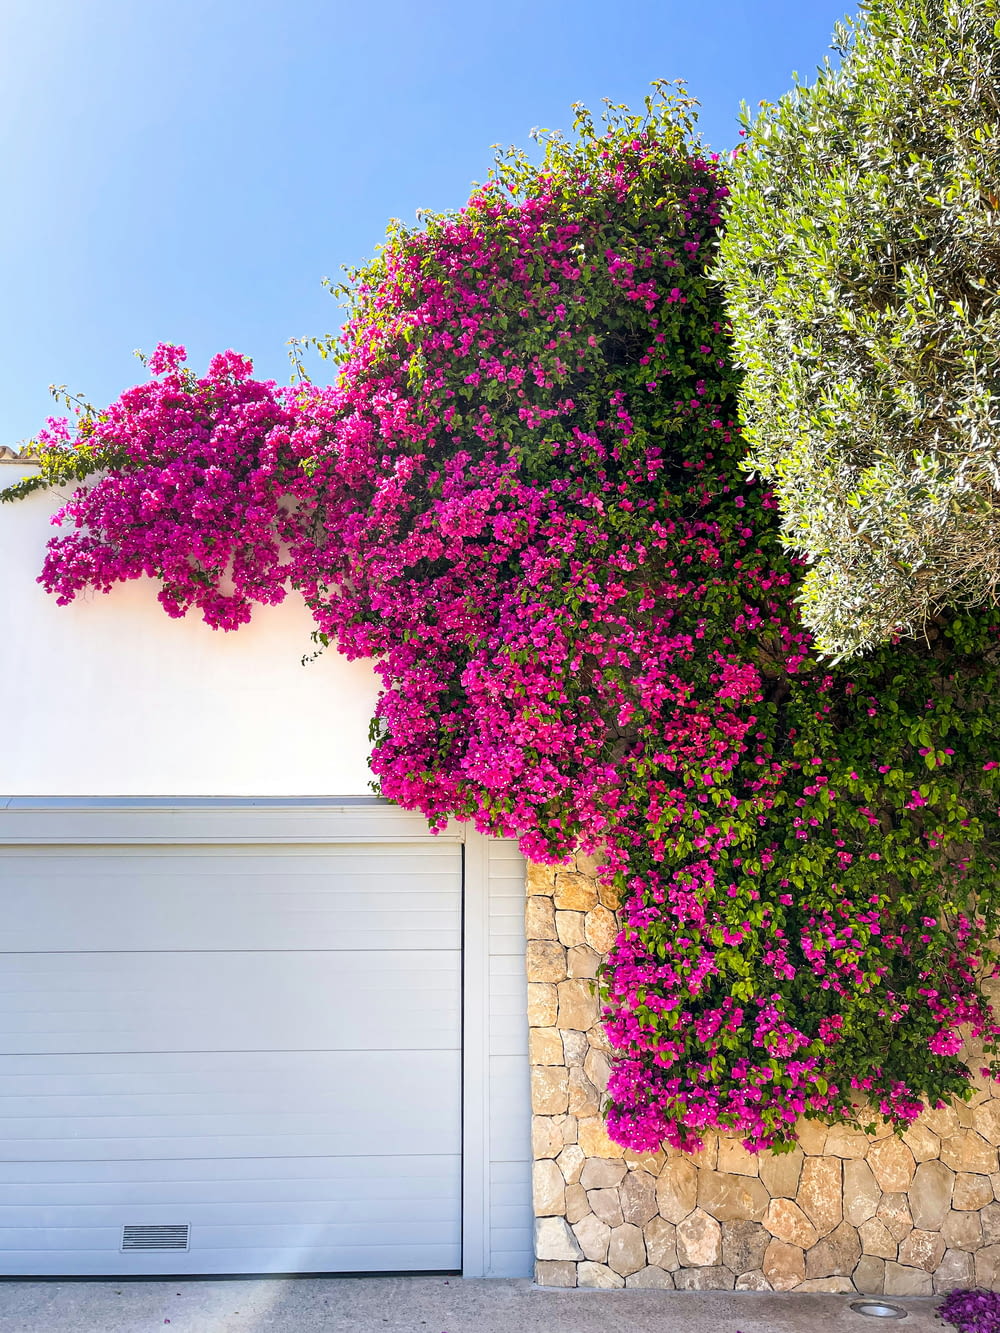 a white garage door sitting next to a wall covered in purple flowers